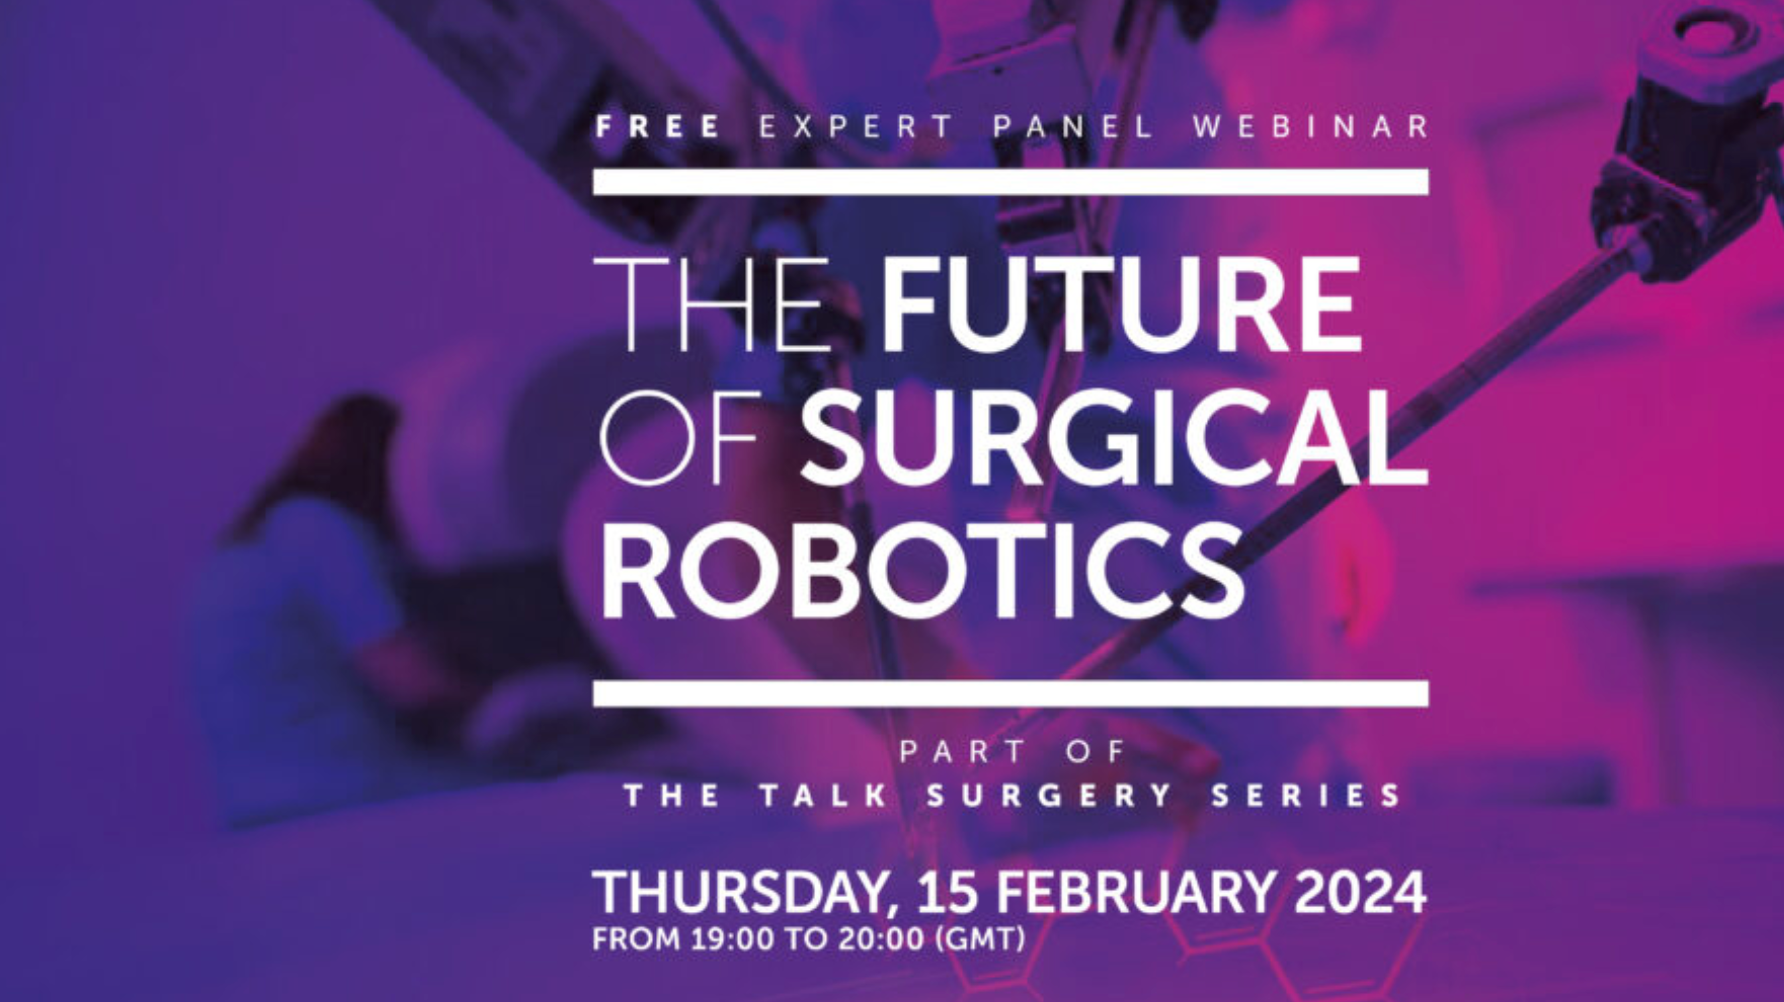 R2 Surgical's Founder to Speak About Accessibility and Sustainability in Surgical Robotics at Upcoming Webinar